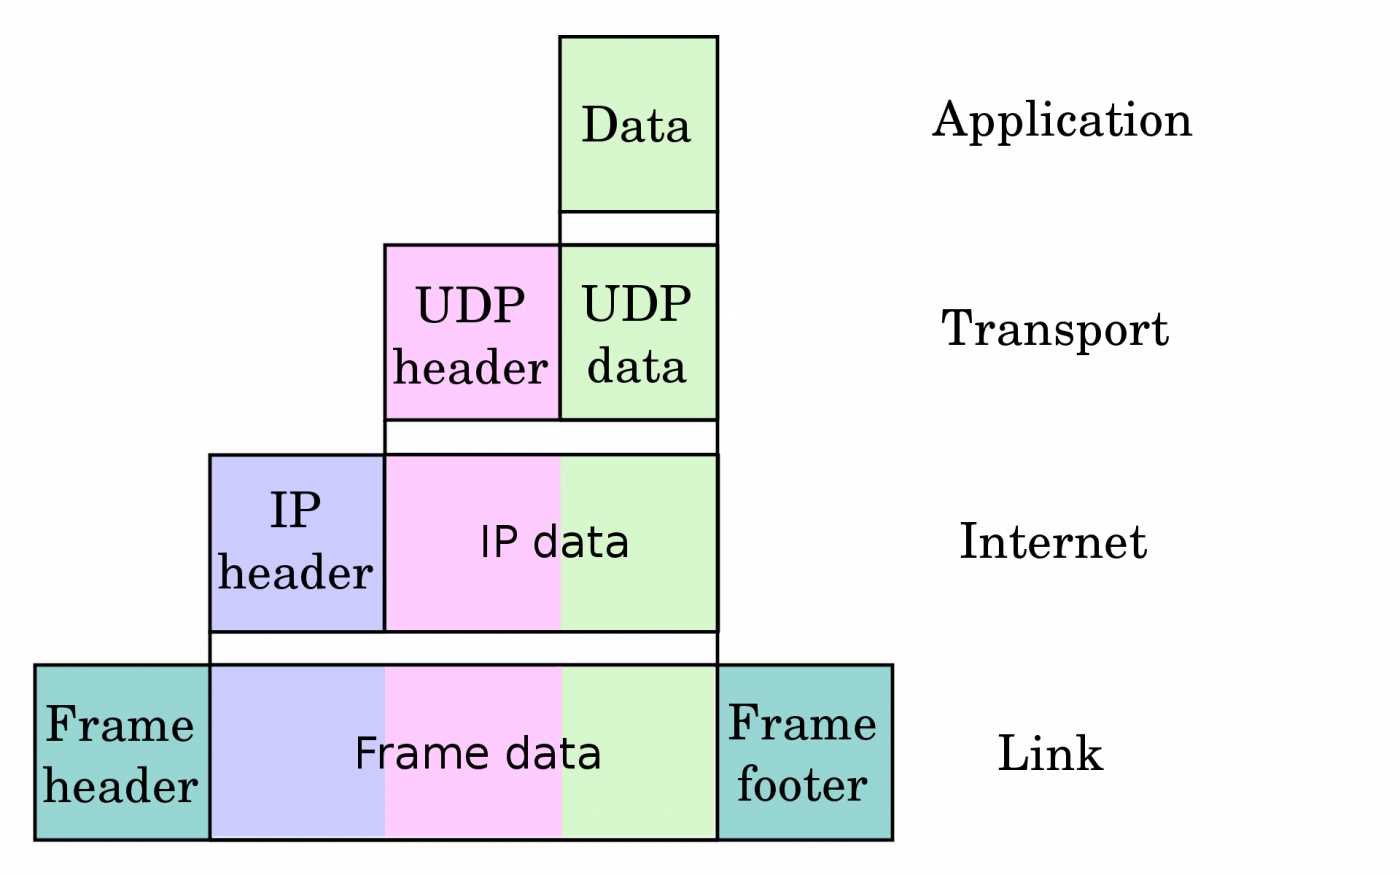 Encapsulation of application data descending through the layered IP architecture